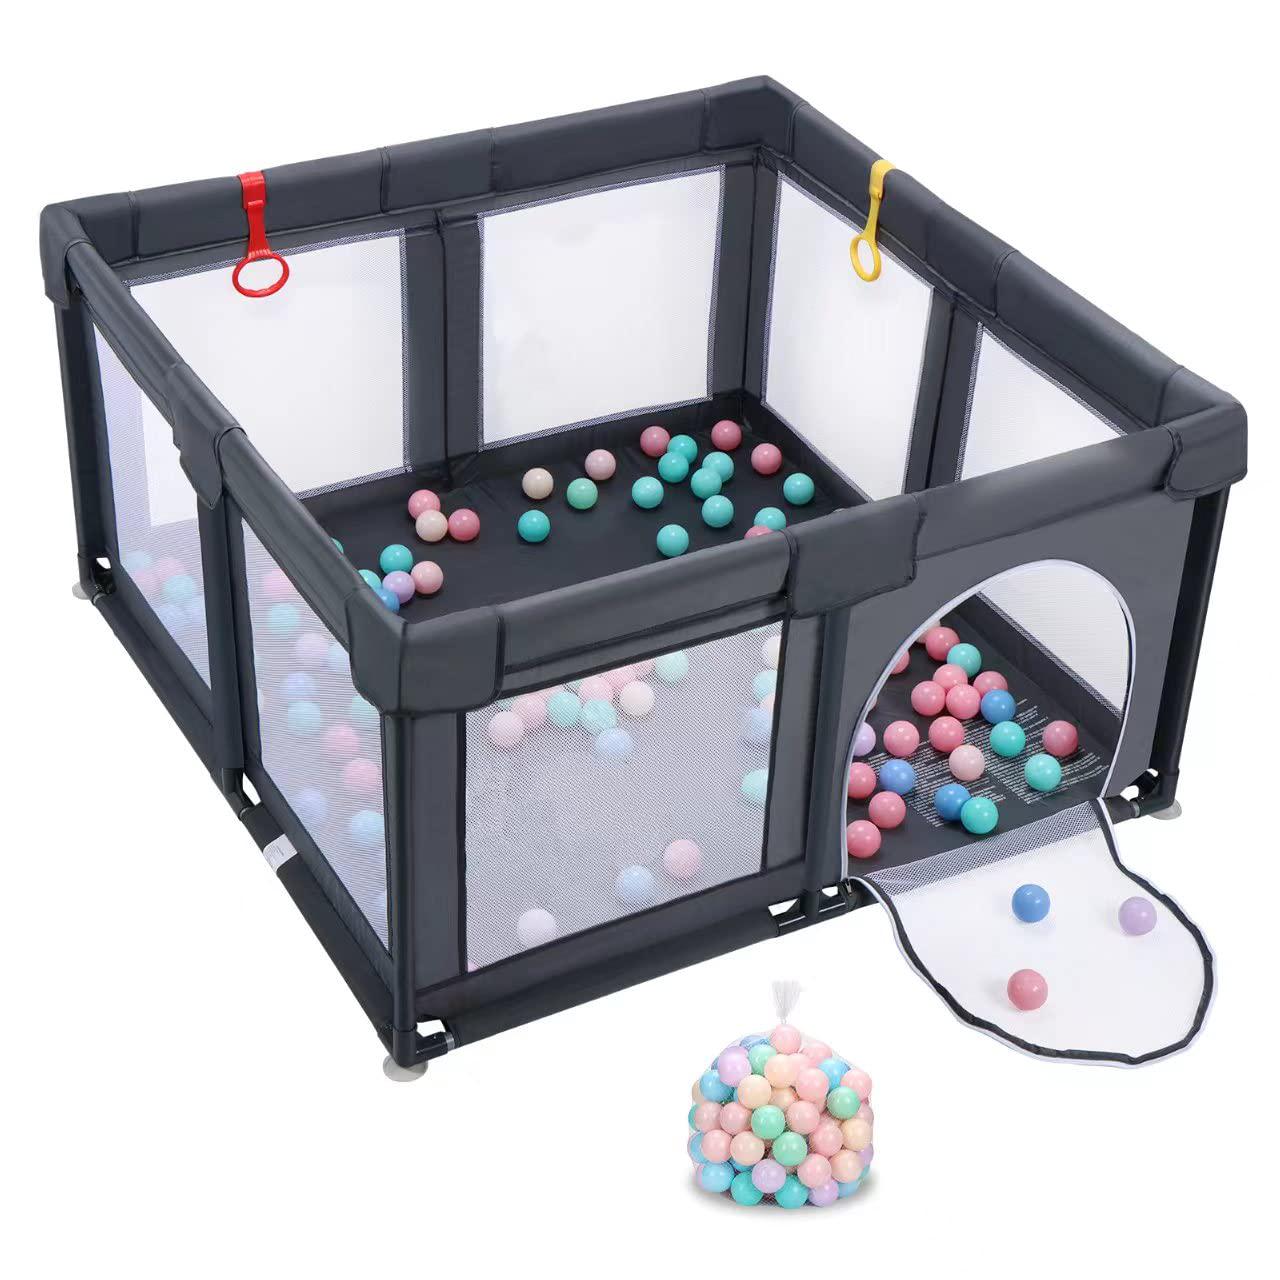 Baby Playpen, Playpen for Babies and Toddlers Indoor and Outdoor Kids Activity Center with 50 Ocean Balls Small Baby Playard Breathable Mesh Kids Safety Play Area, 47in x 47in (Dark Gray)-